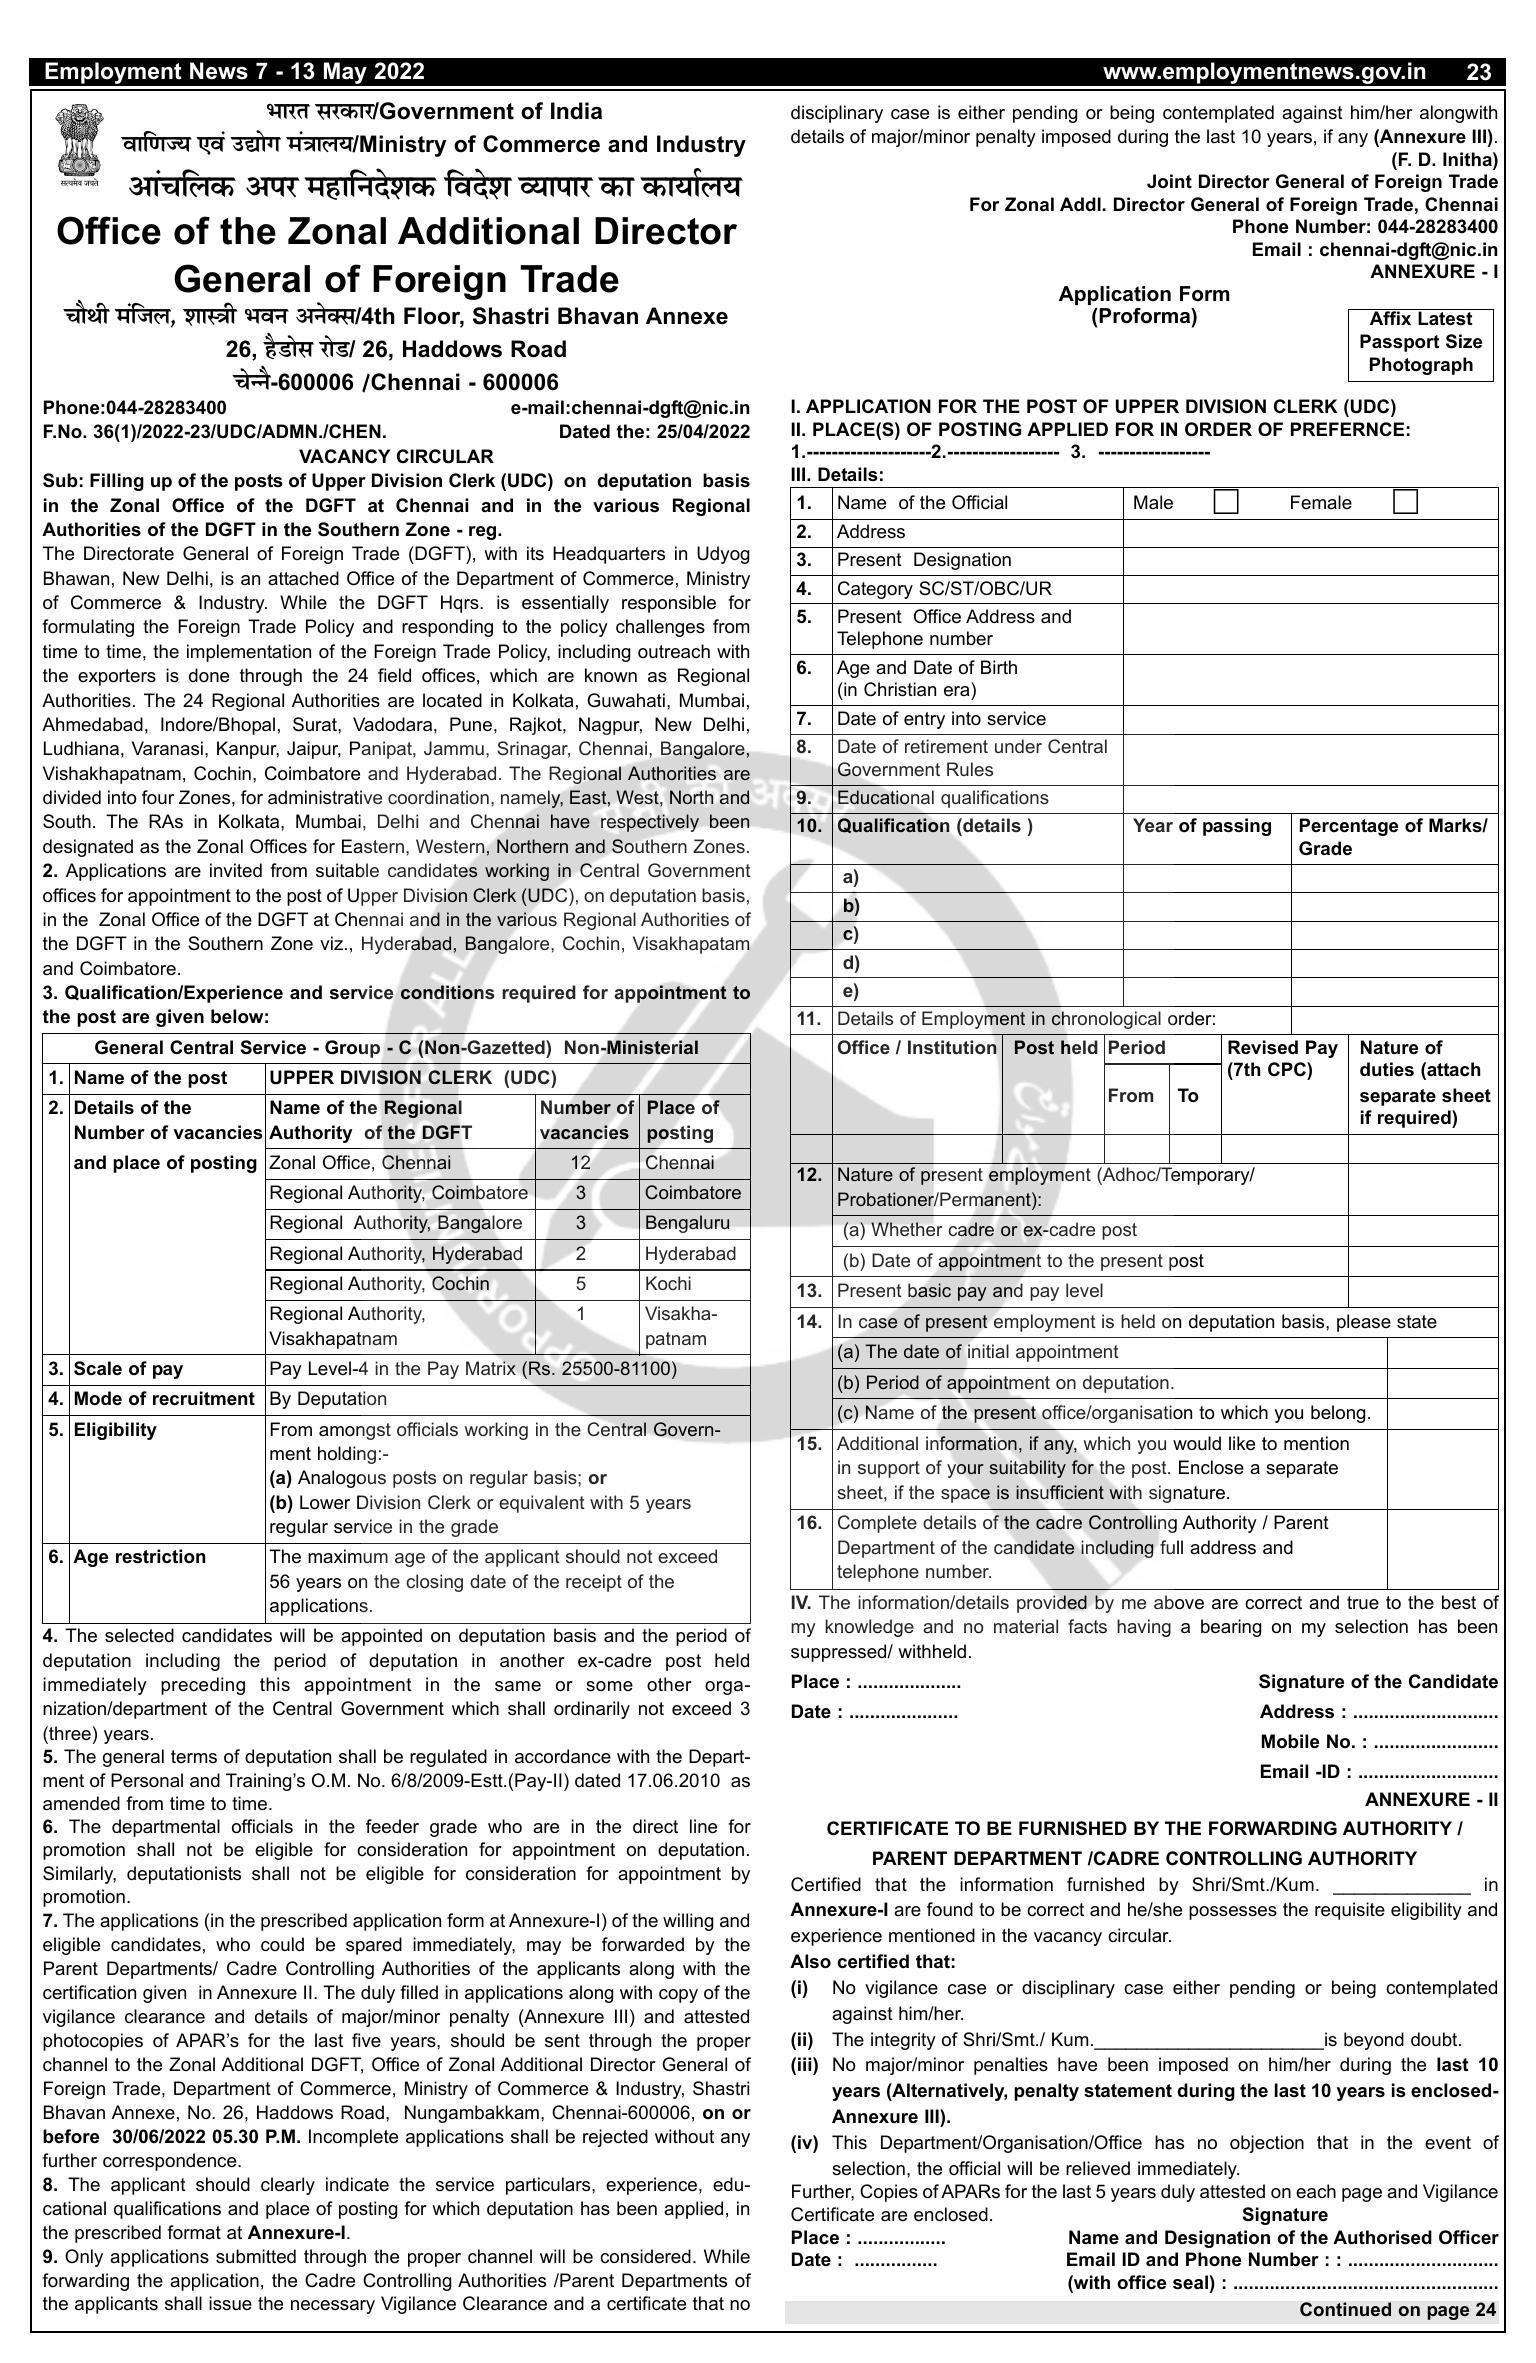 Director-General of Foreign Trade Recruitment 2022 For Upper Division Clerk (UDC) - Page 1